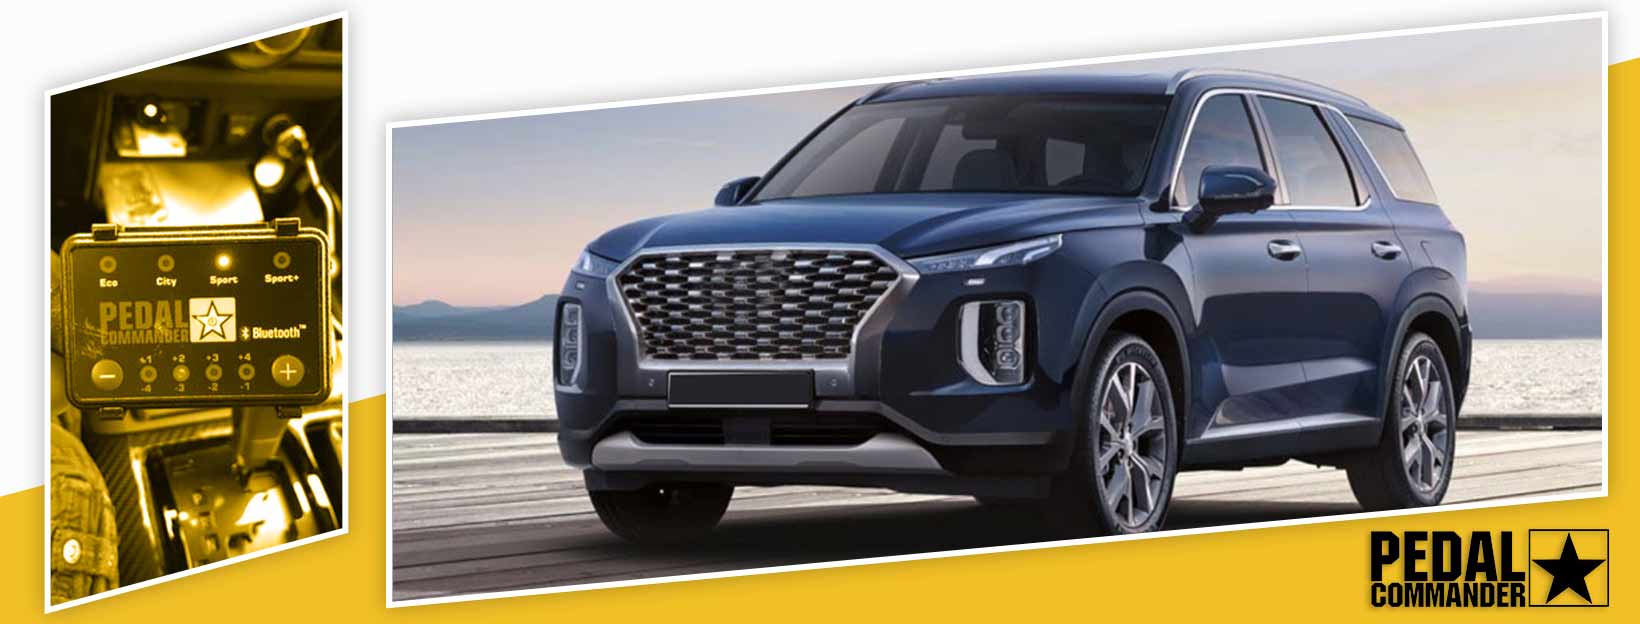 Pedal Commander for Hyundai Palisade - front